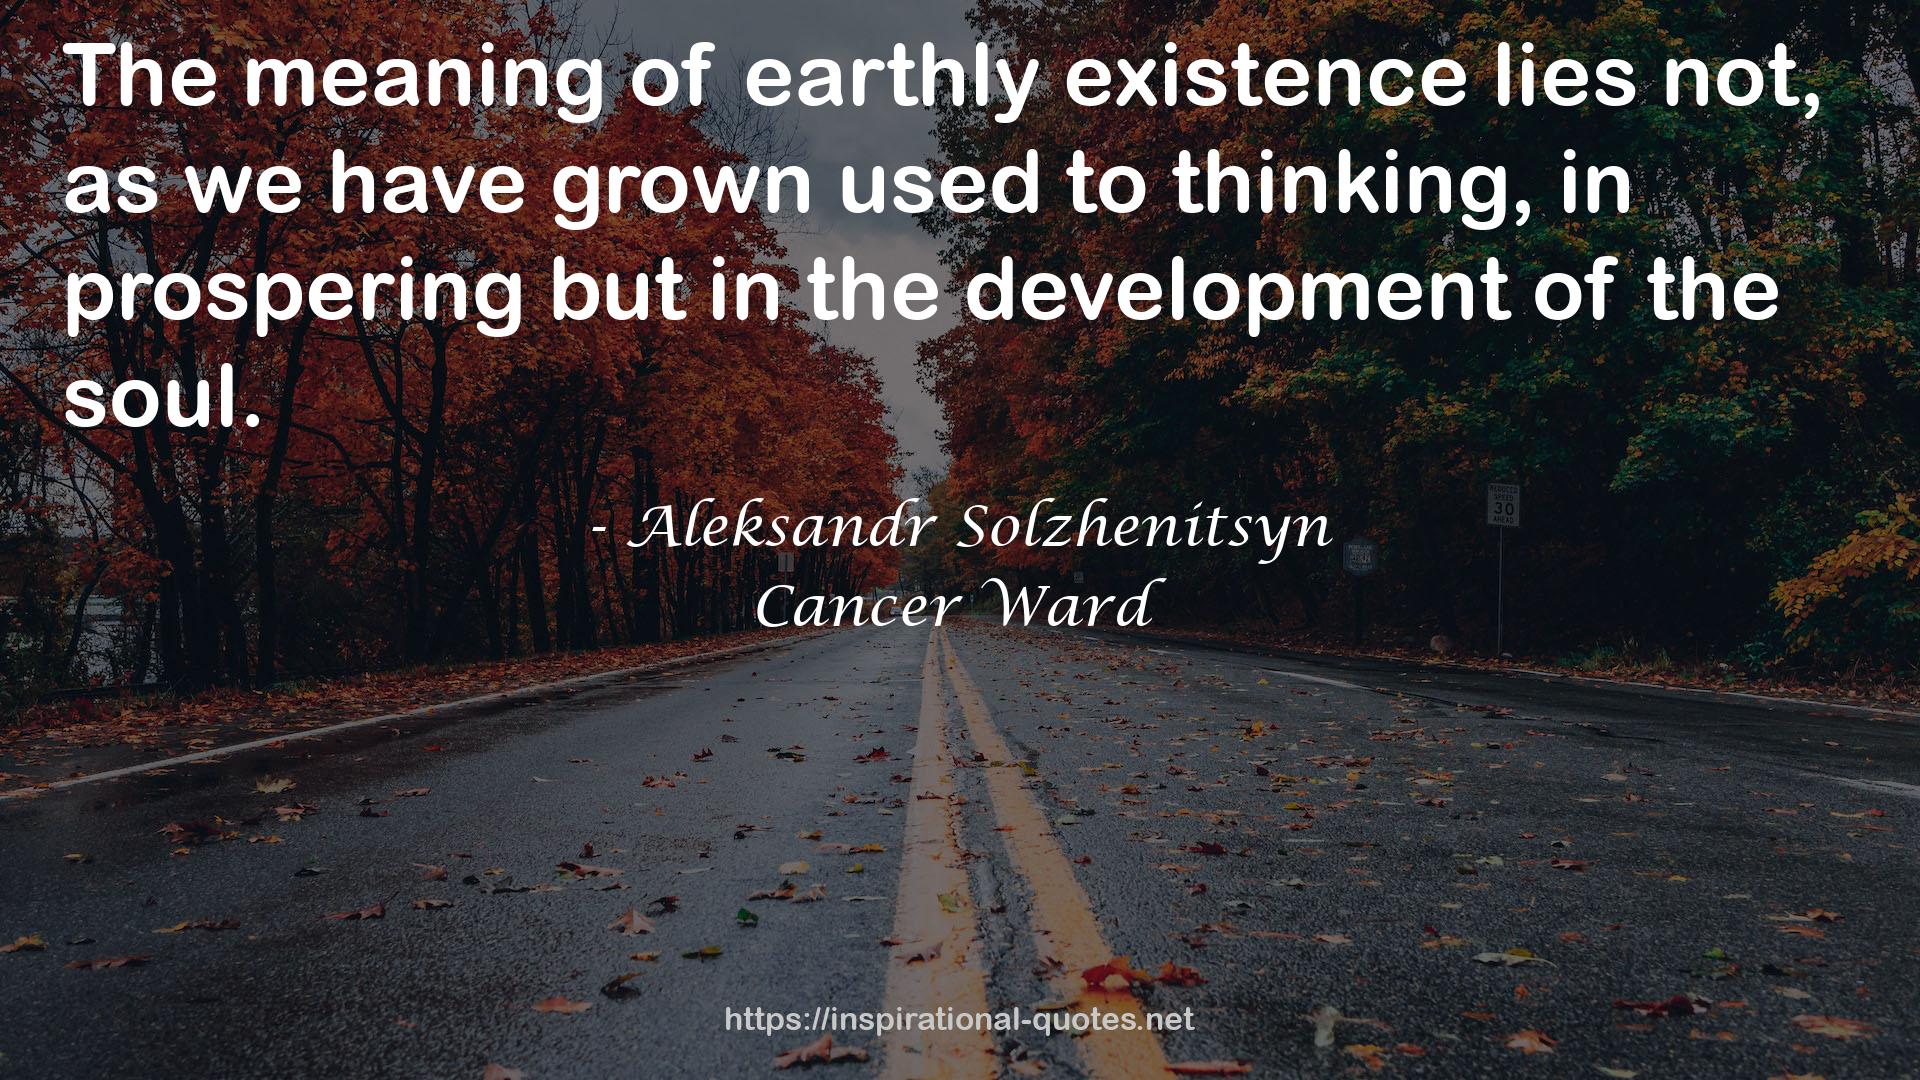 earthly existence  QUOTES